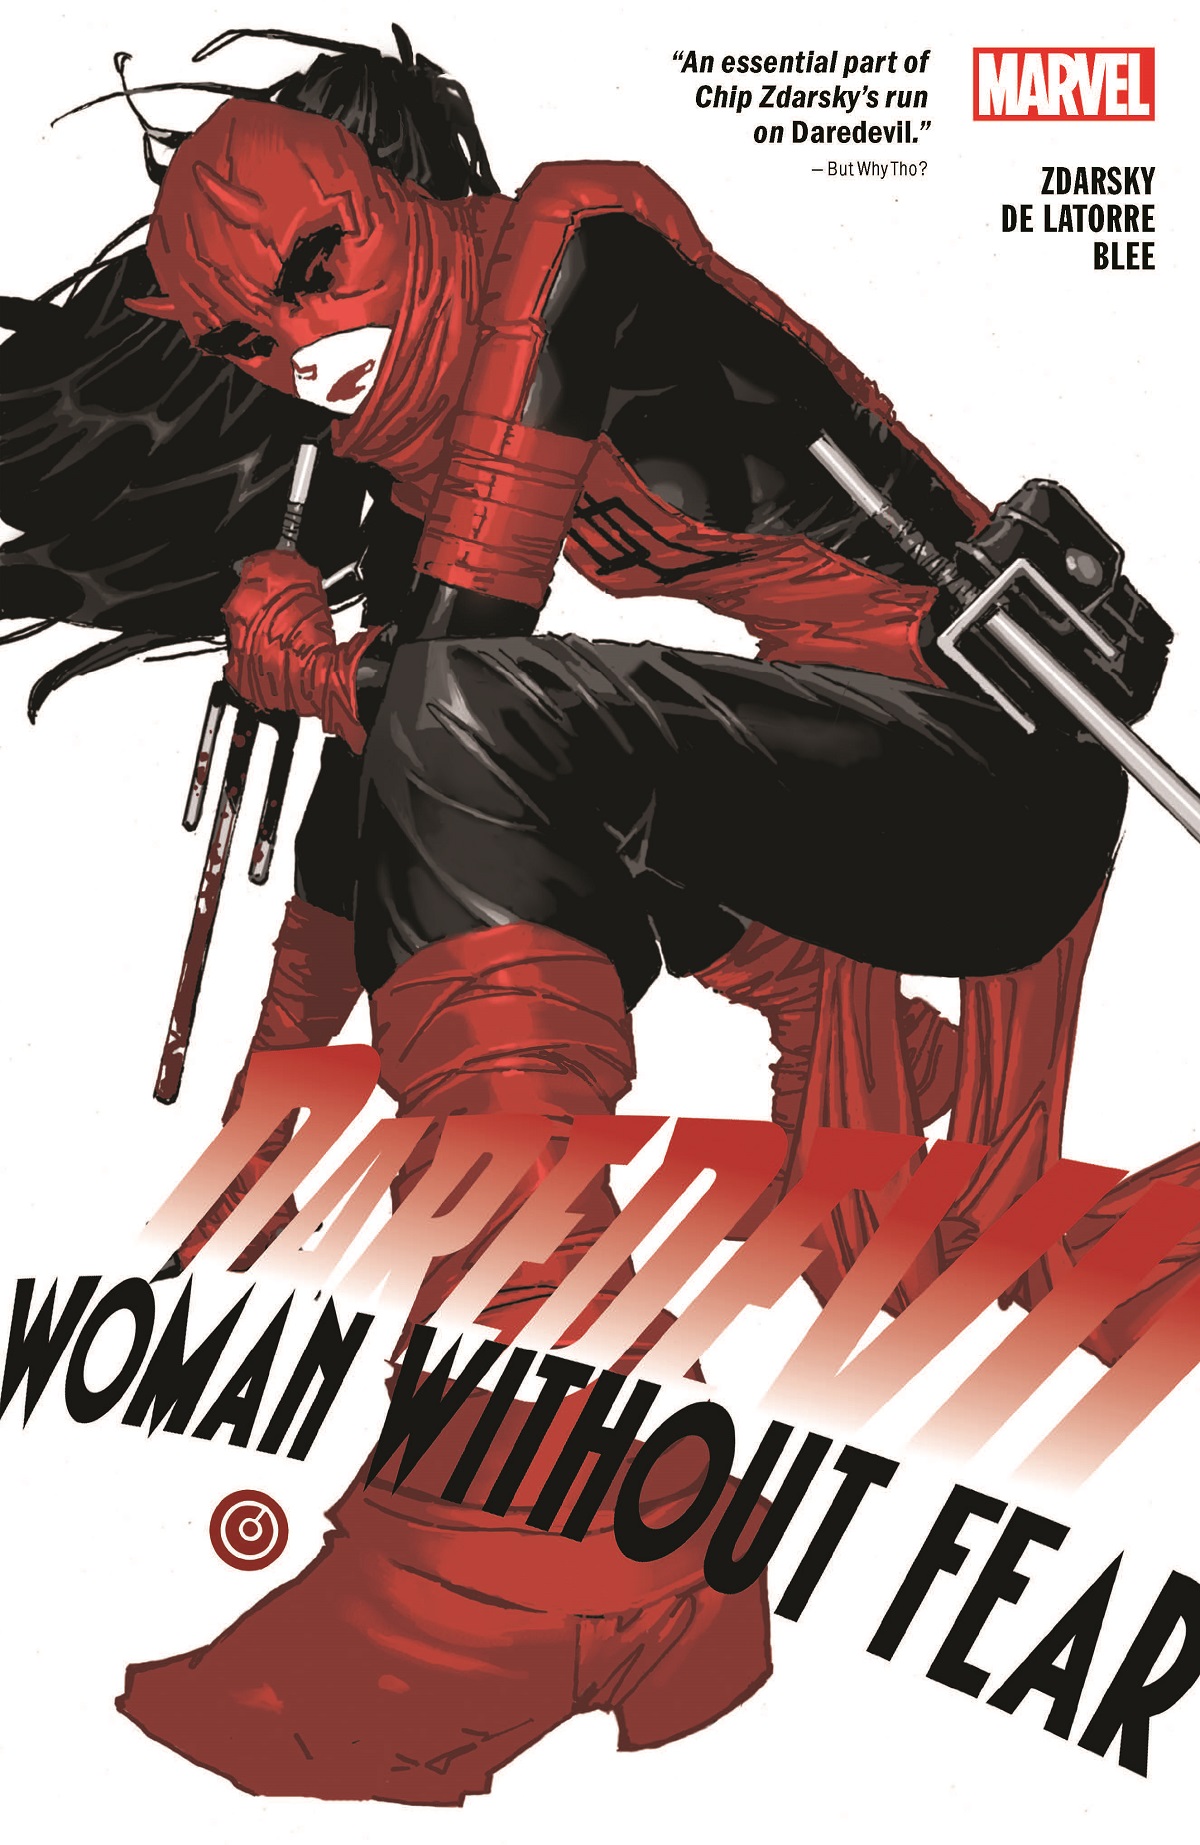 Daredevil: Woman Without Fear (Trade Paperback)